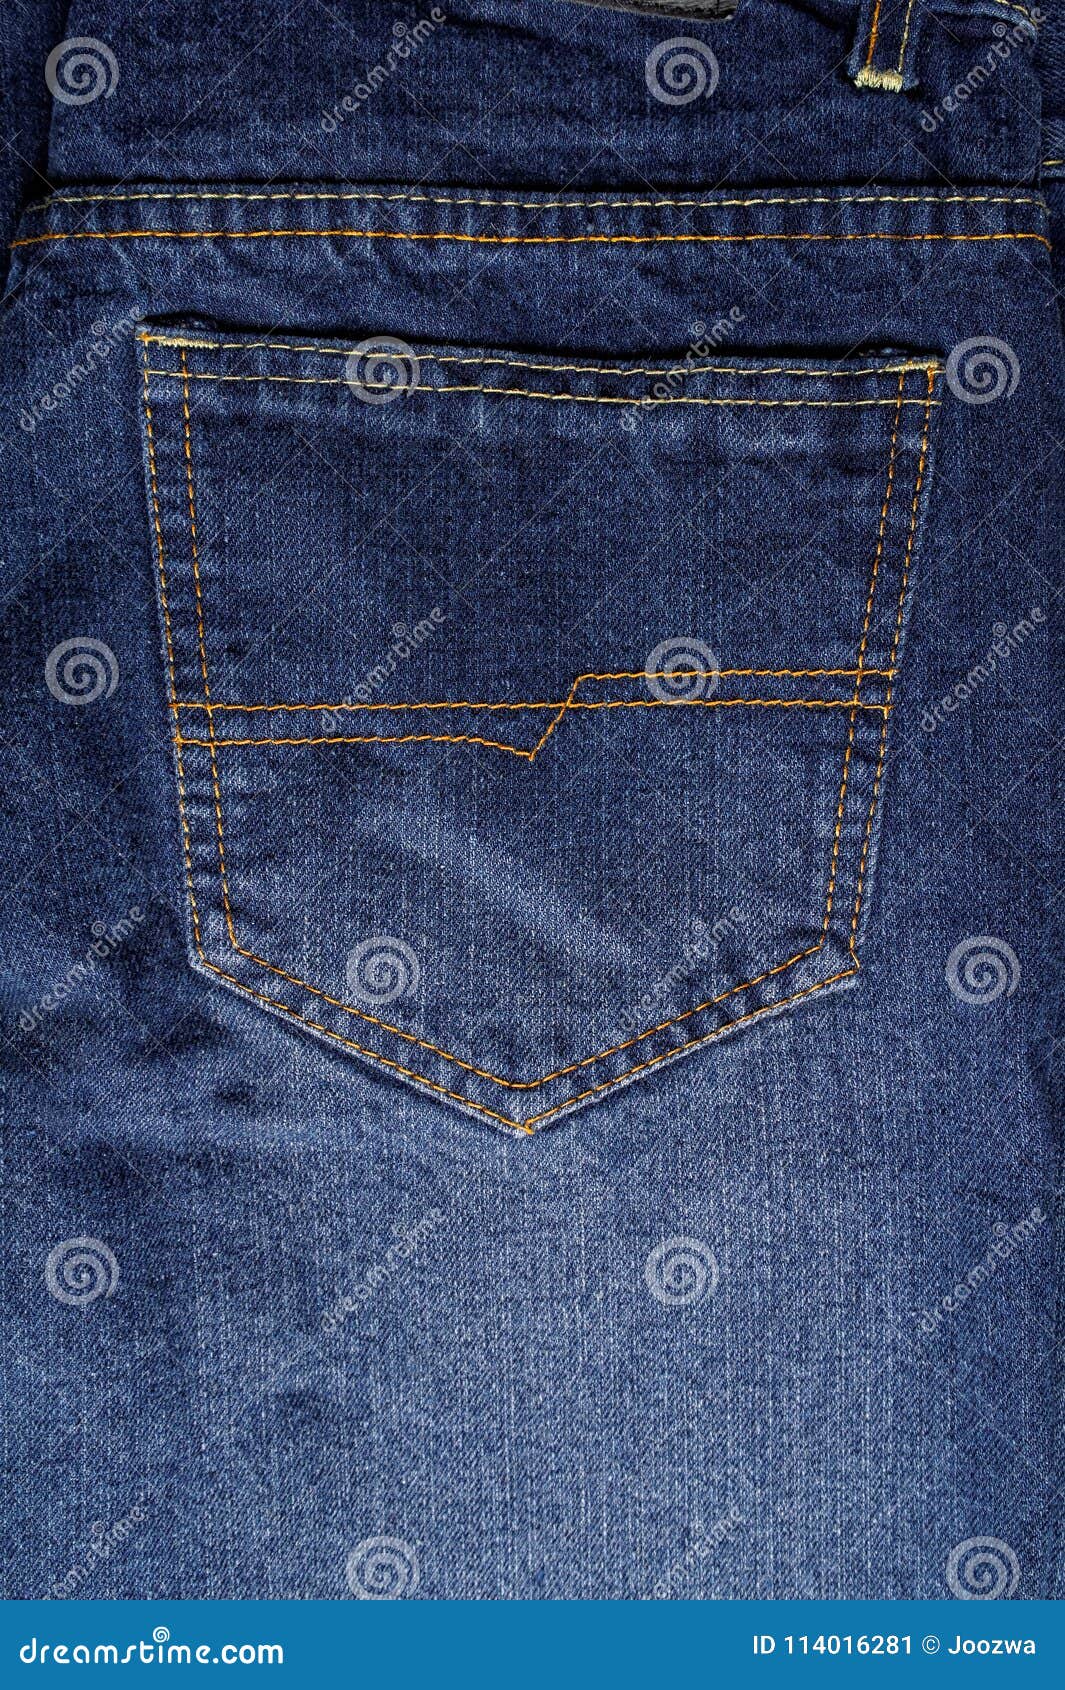 Jeans texture stock image. Image of textile, material - 114016281